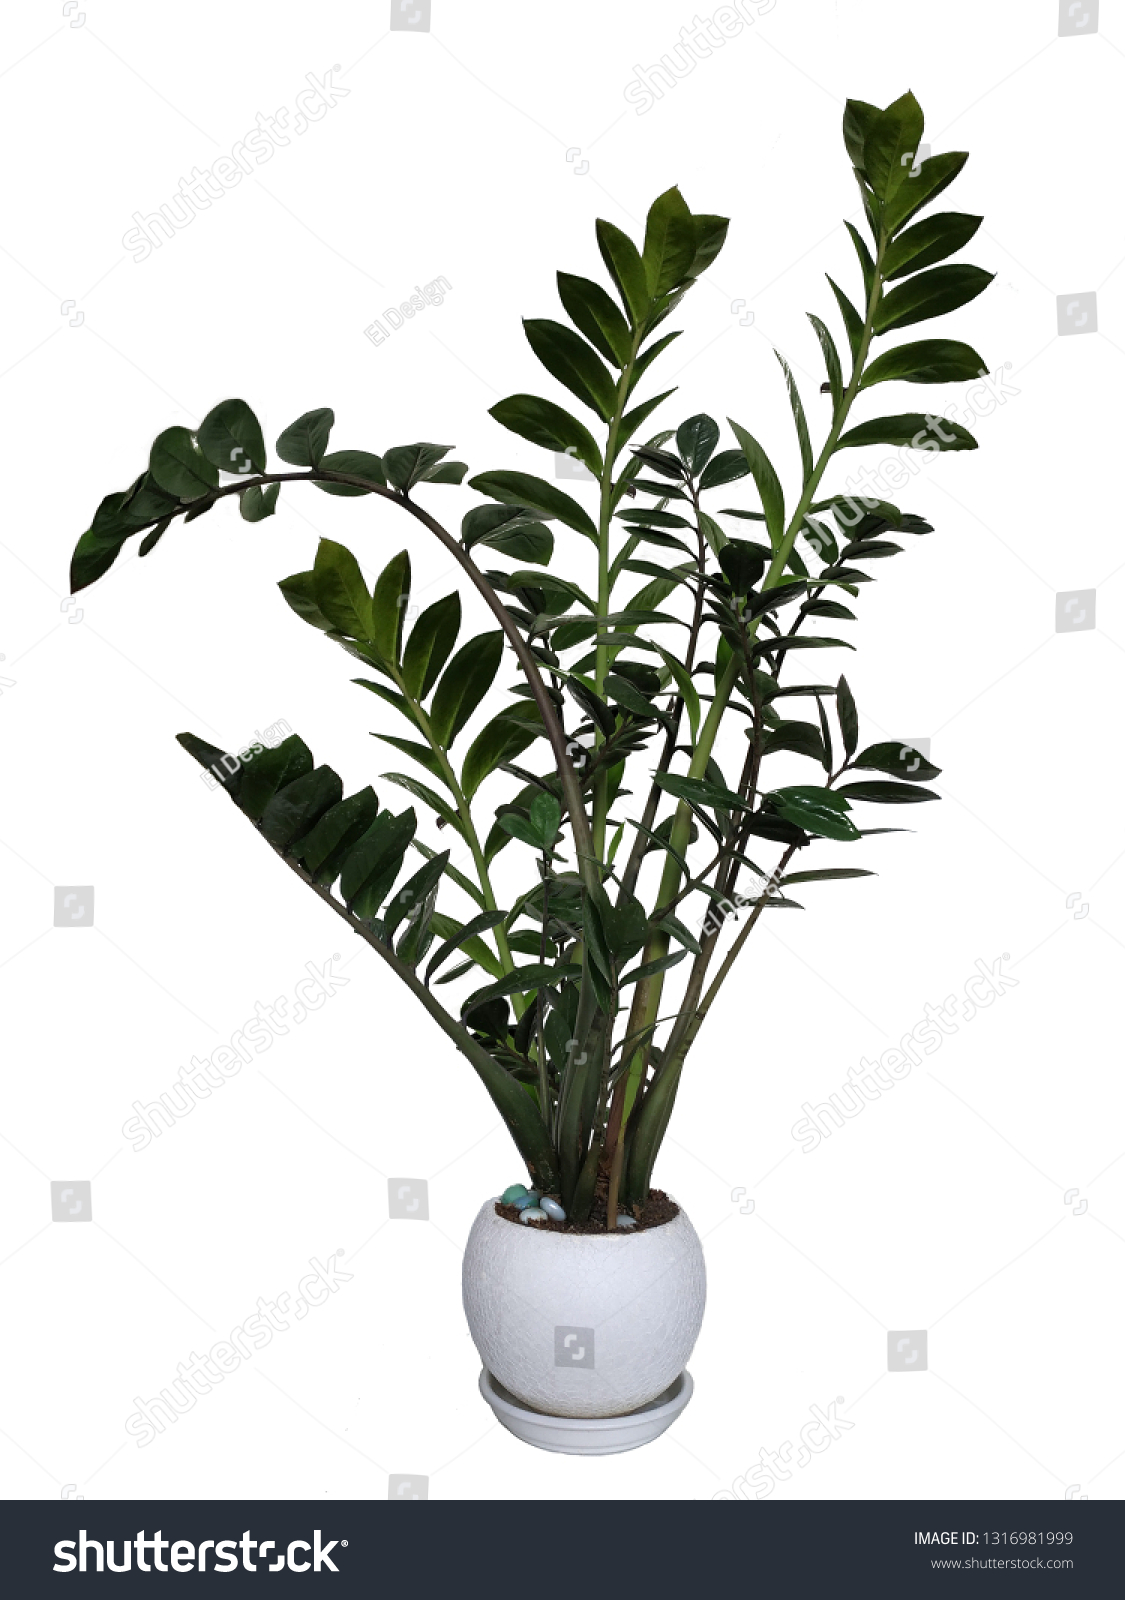 Zamioculcas, interior plant isolated on white background #1316981999